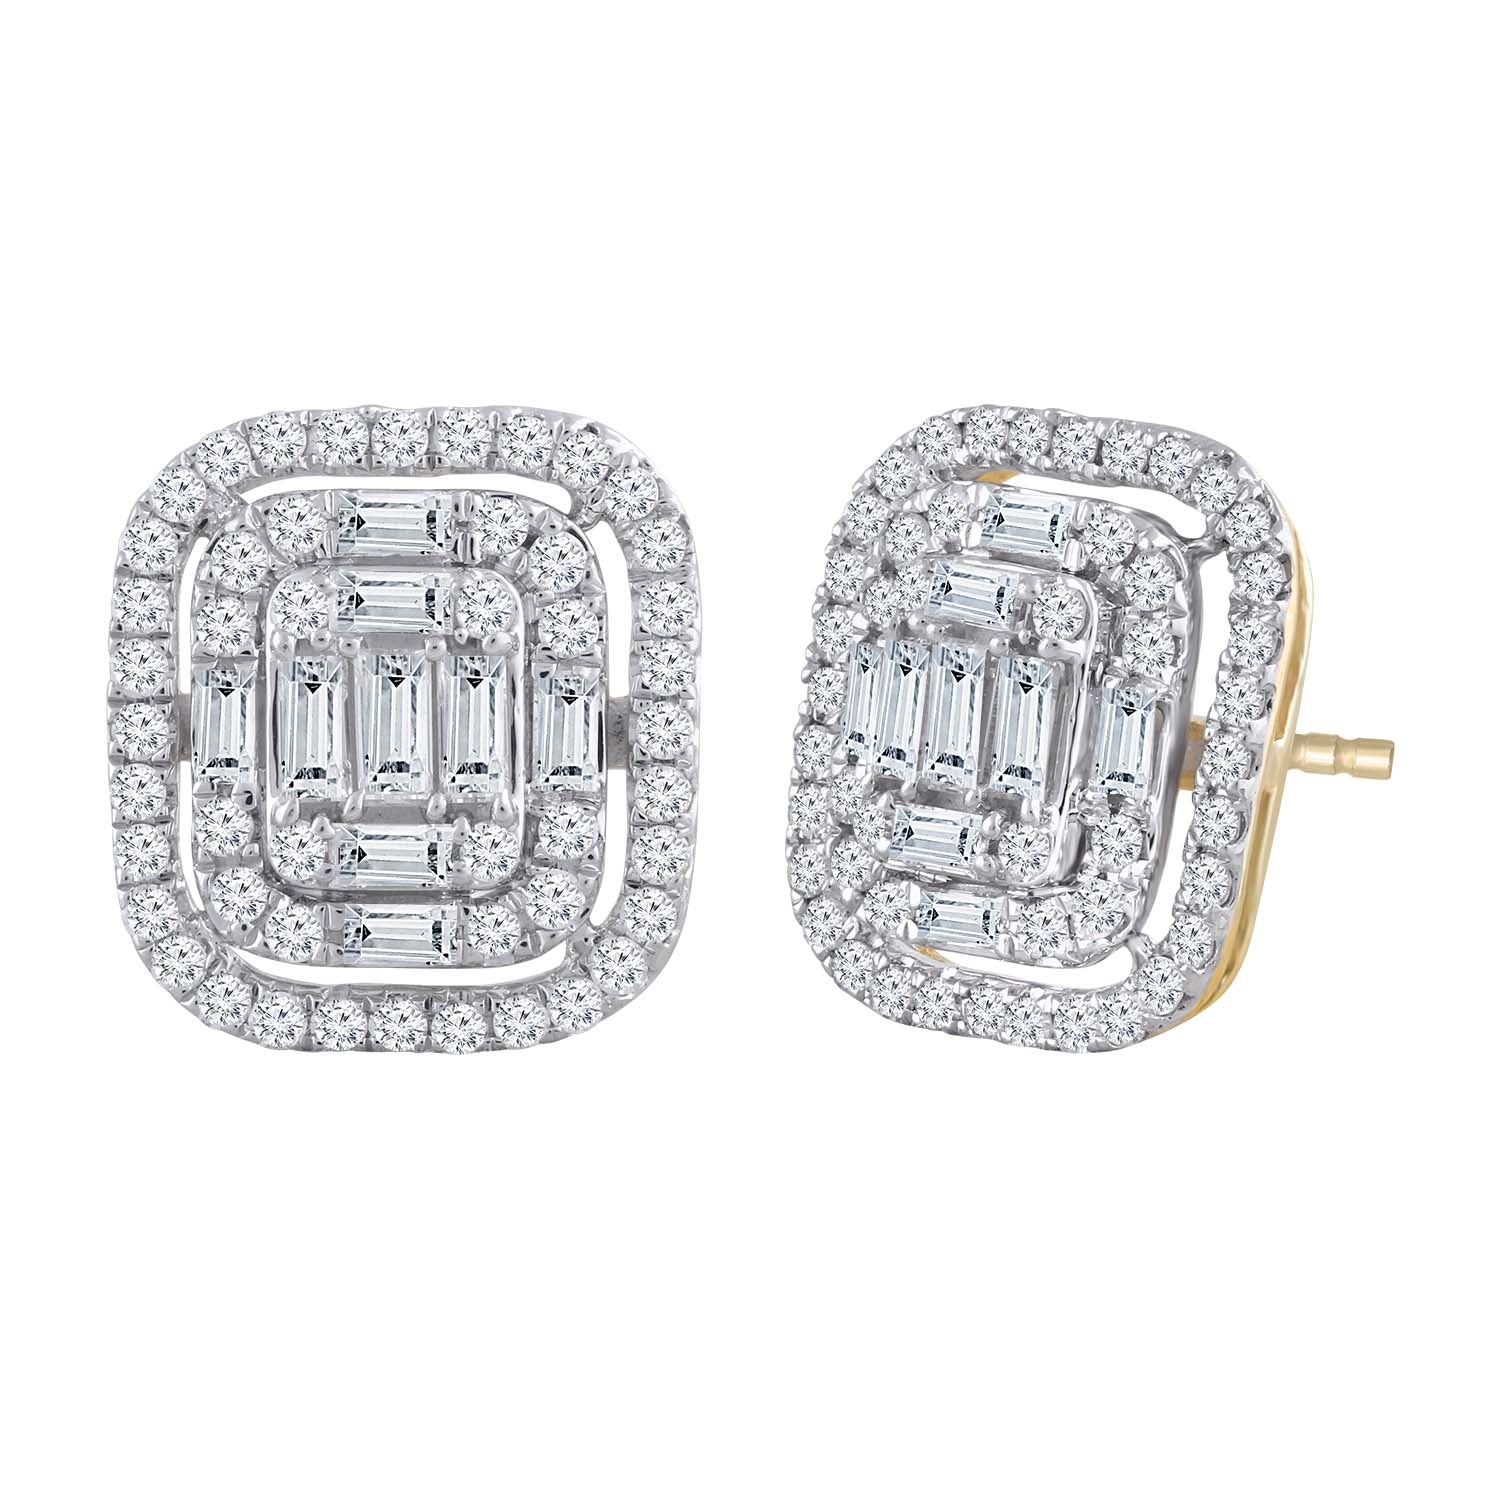 Cluster Stud Earrings with 1ct Diamond in 9K Yellow Gold